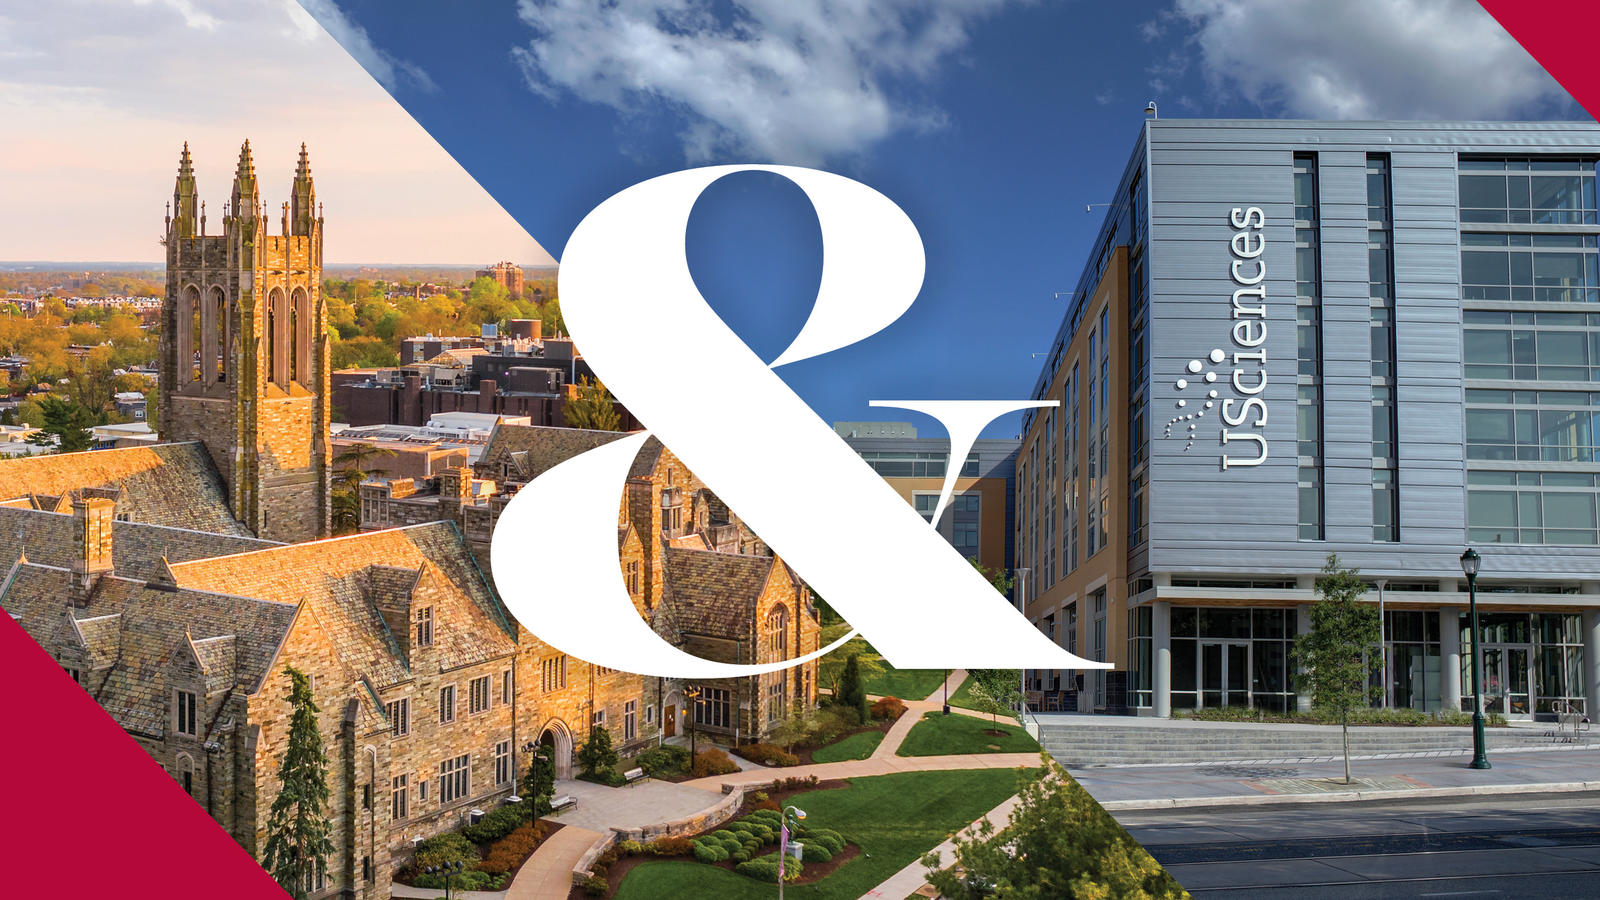 Saint Joseph's and University of the Sciences' campuses connected with an ampersand